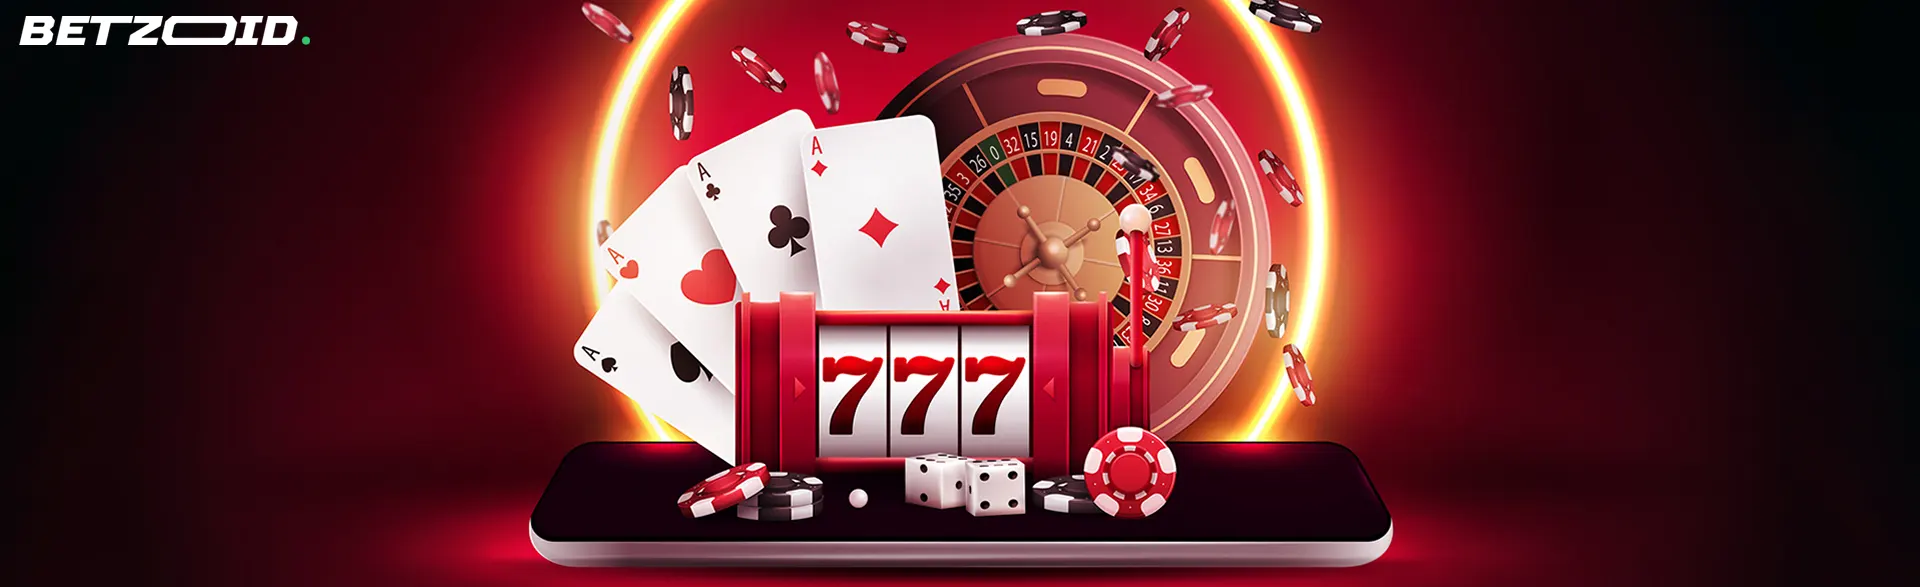 Mobile casino interface showcasing a vibrant roulette wheel and playing cards, epitomizing the best reload bonuses available at online casinos in Canada.